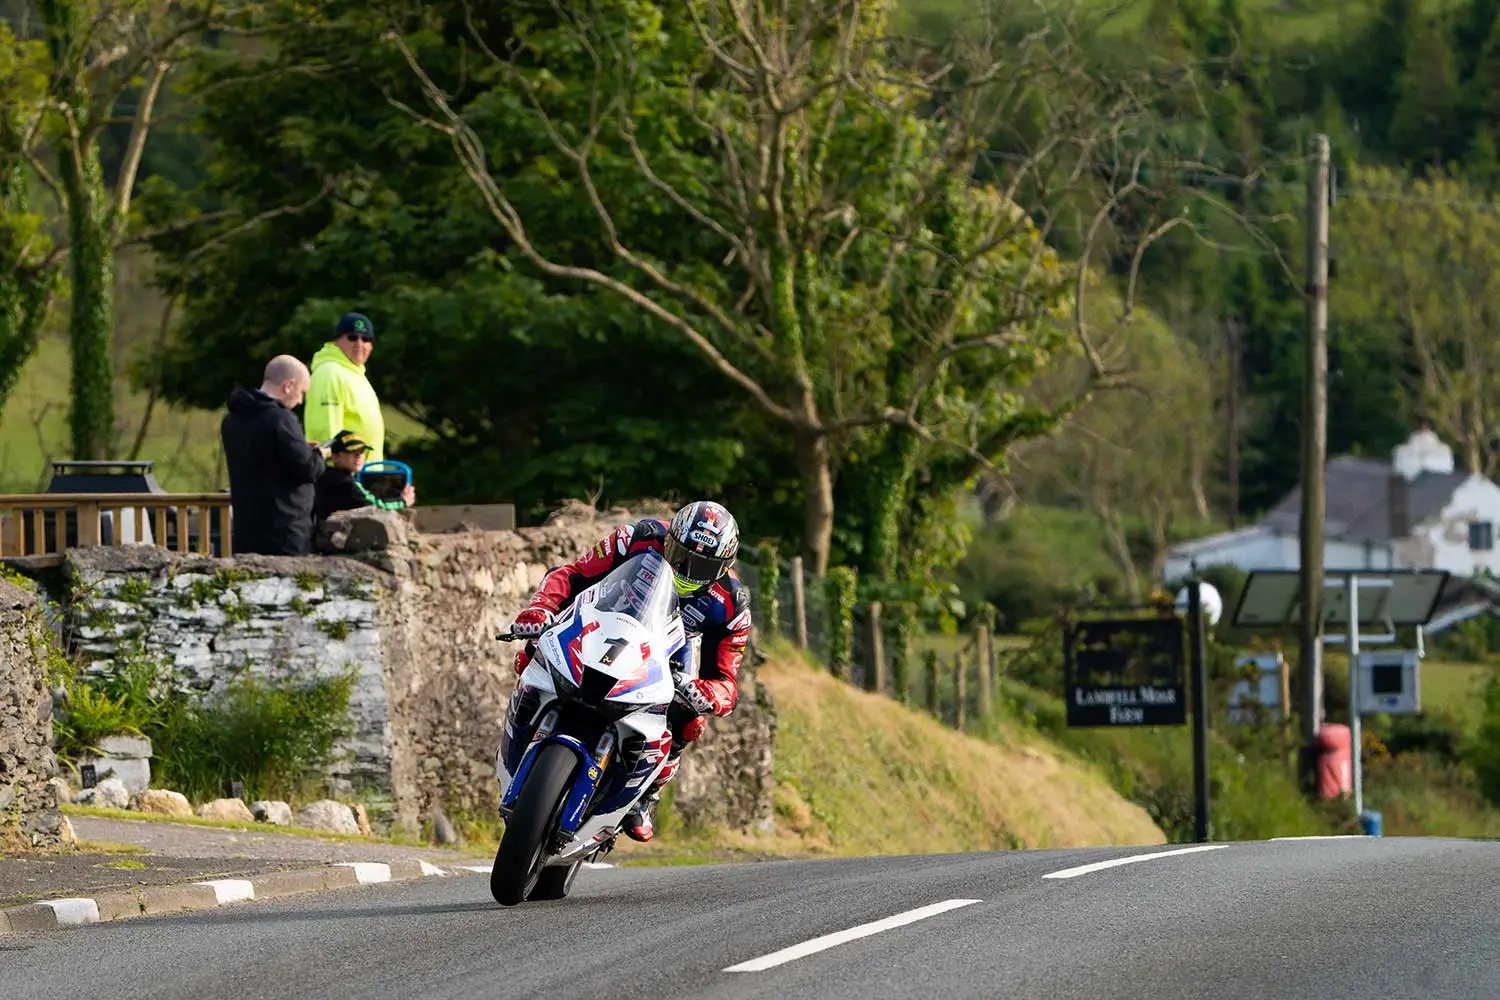 A view of the motorcycles attending the Isle of Man TT. Photo courtesy of MCN.